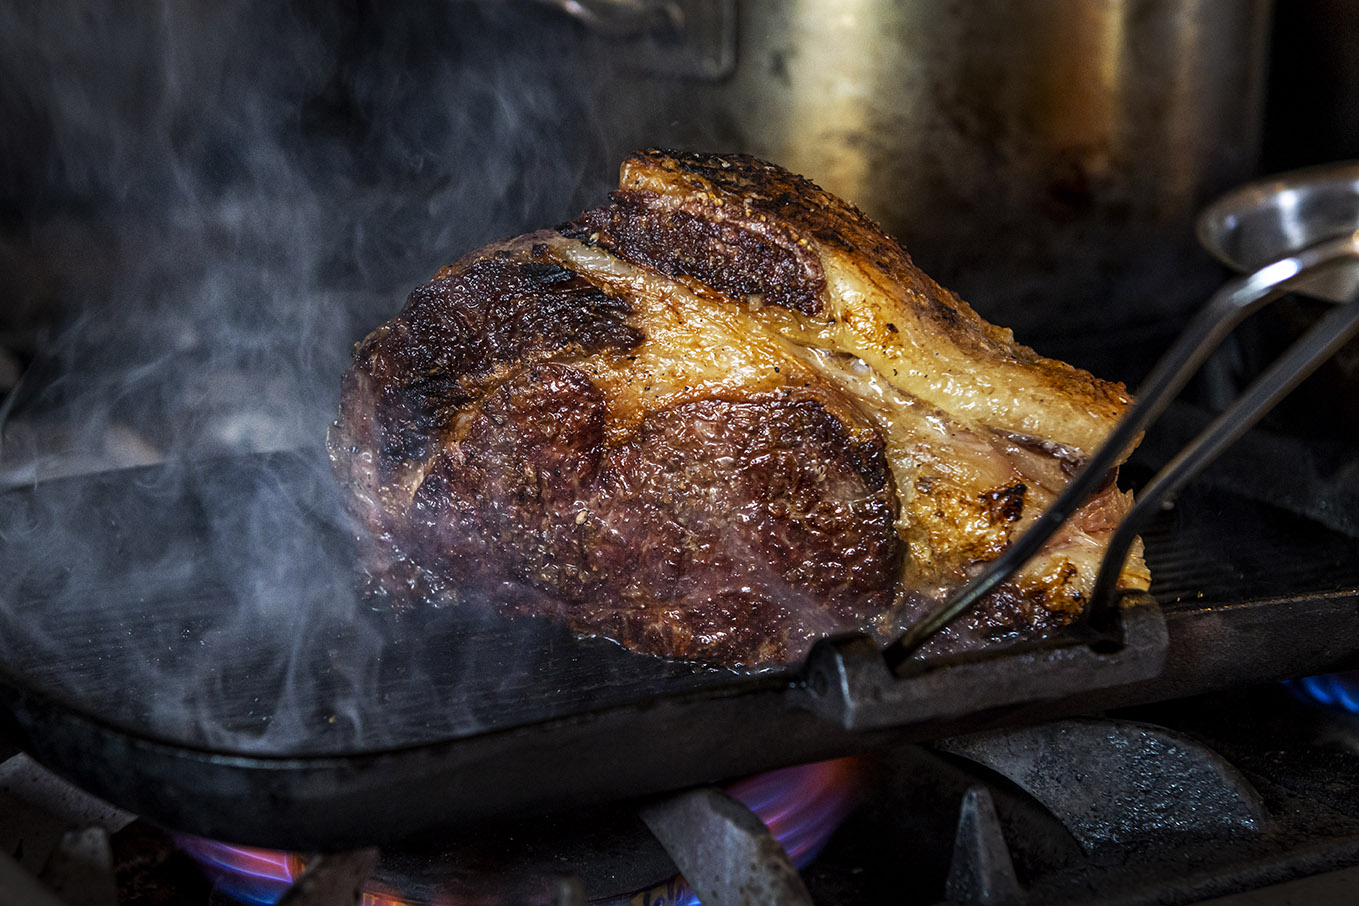 A large cut of beef sizzling on the grill at the Lemon Street Longstore